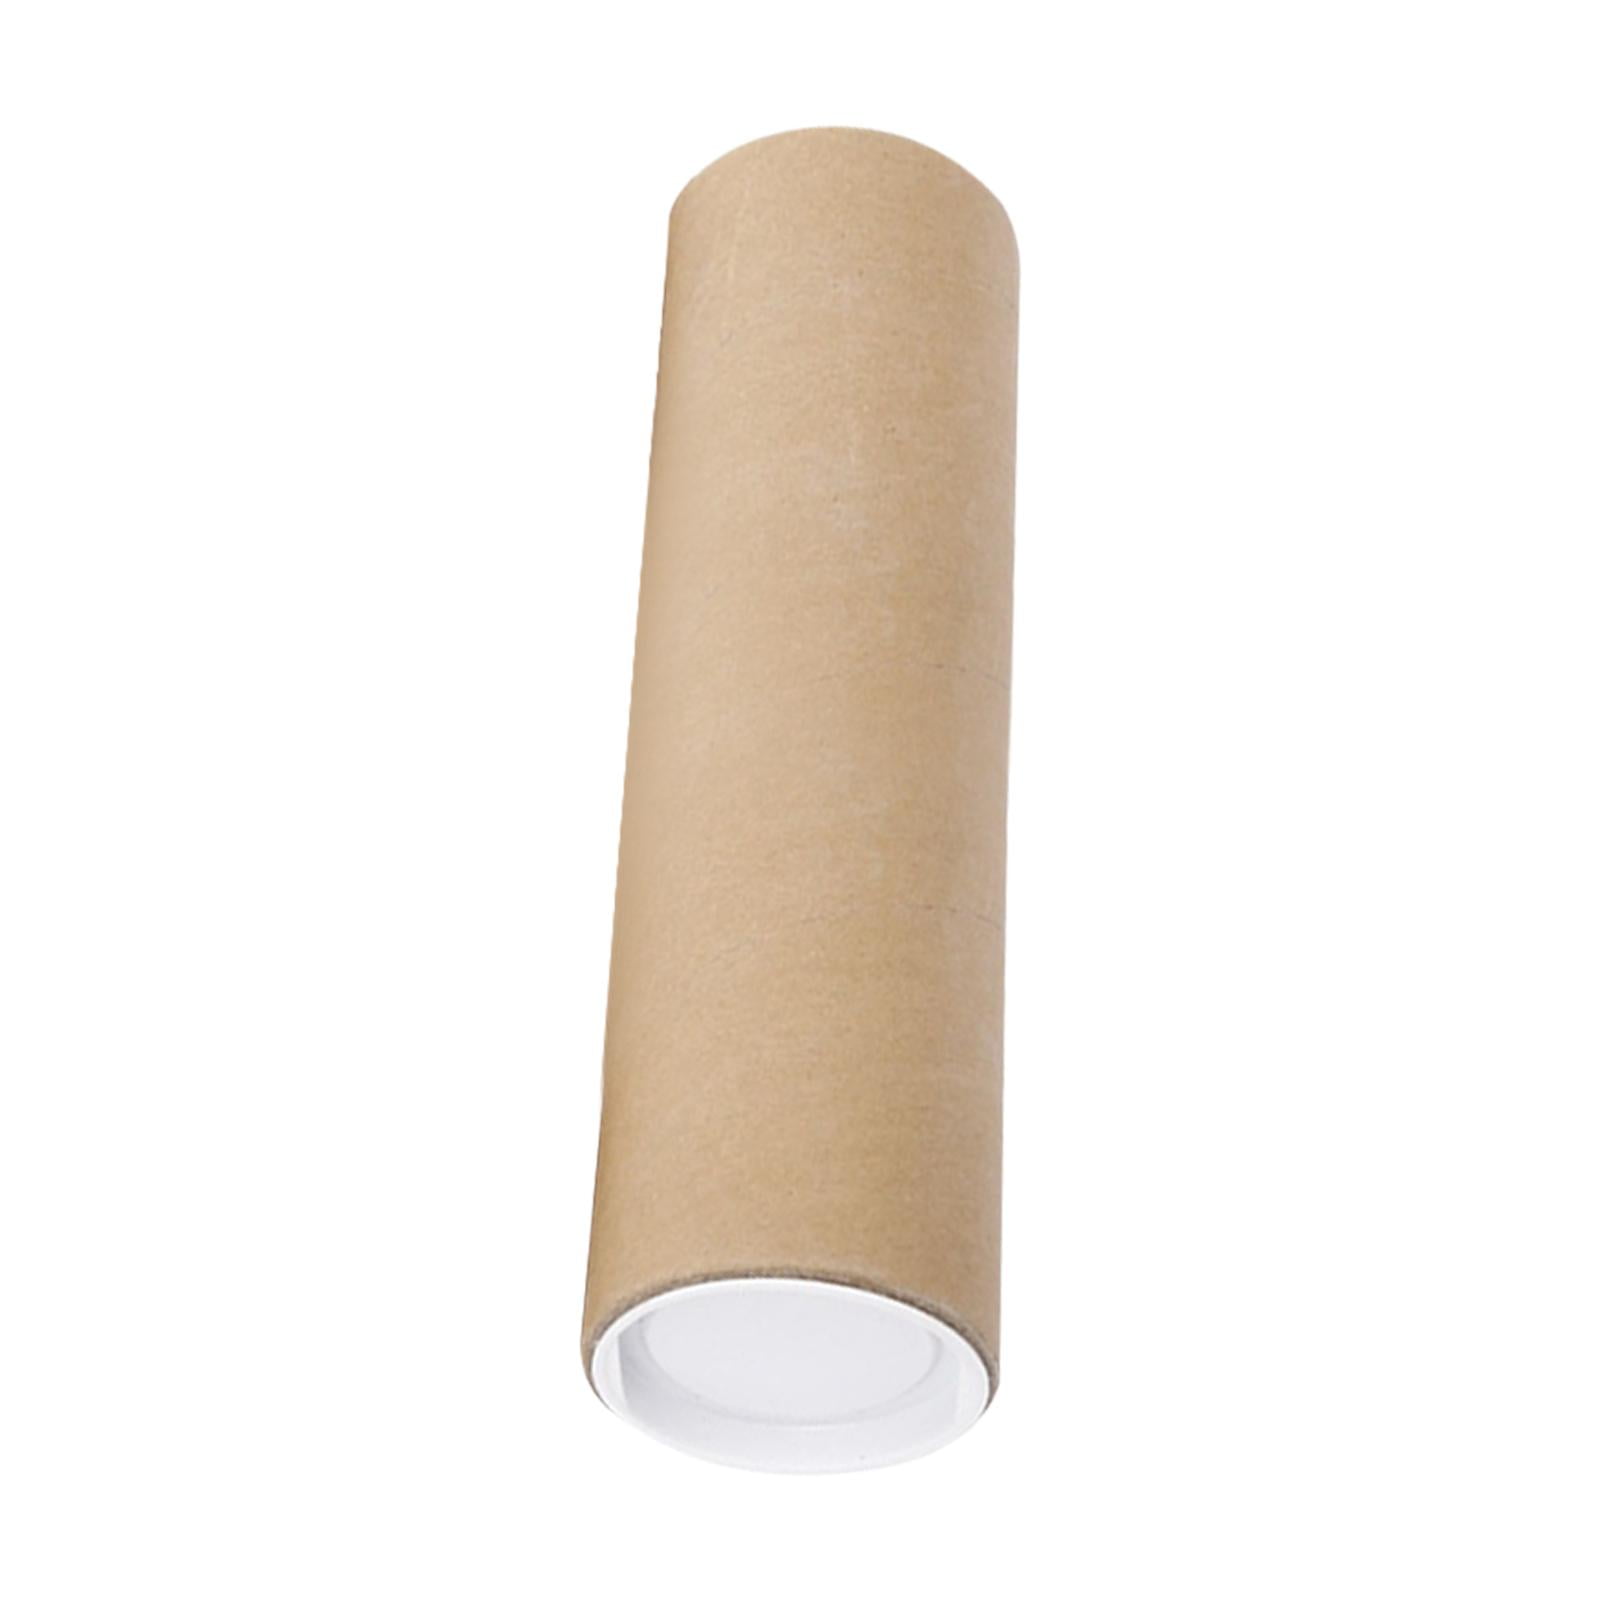 Wholesale Mailing Tubes for Artworks, Drawings, Prints, The Boxery